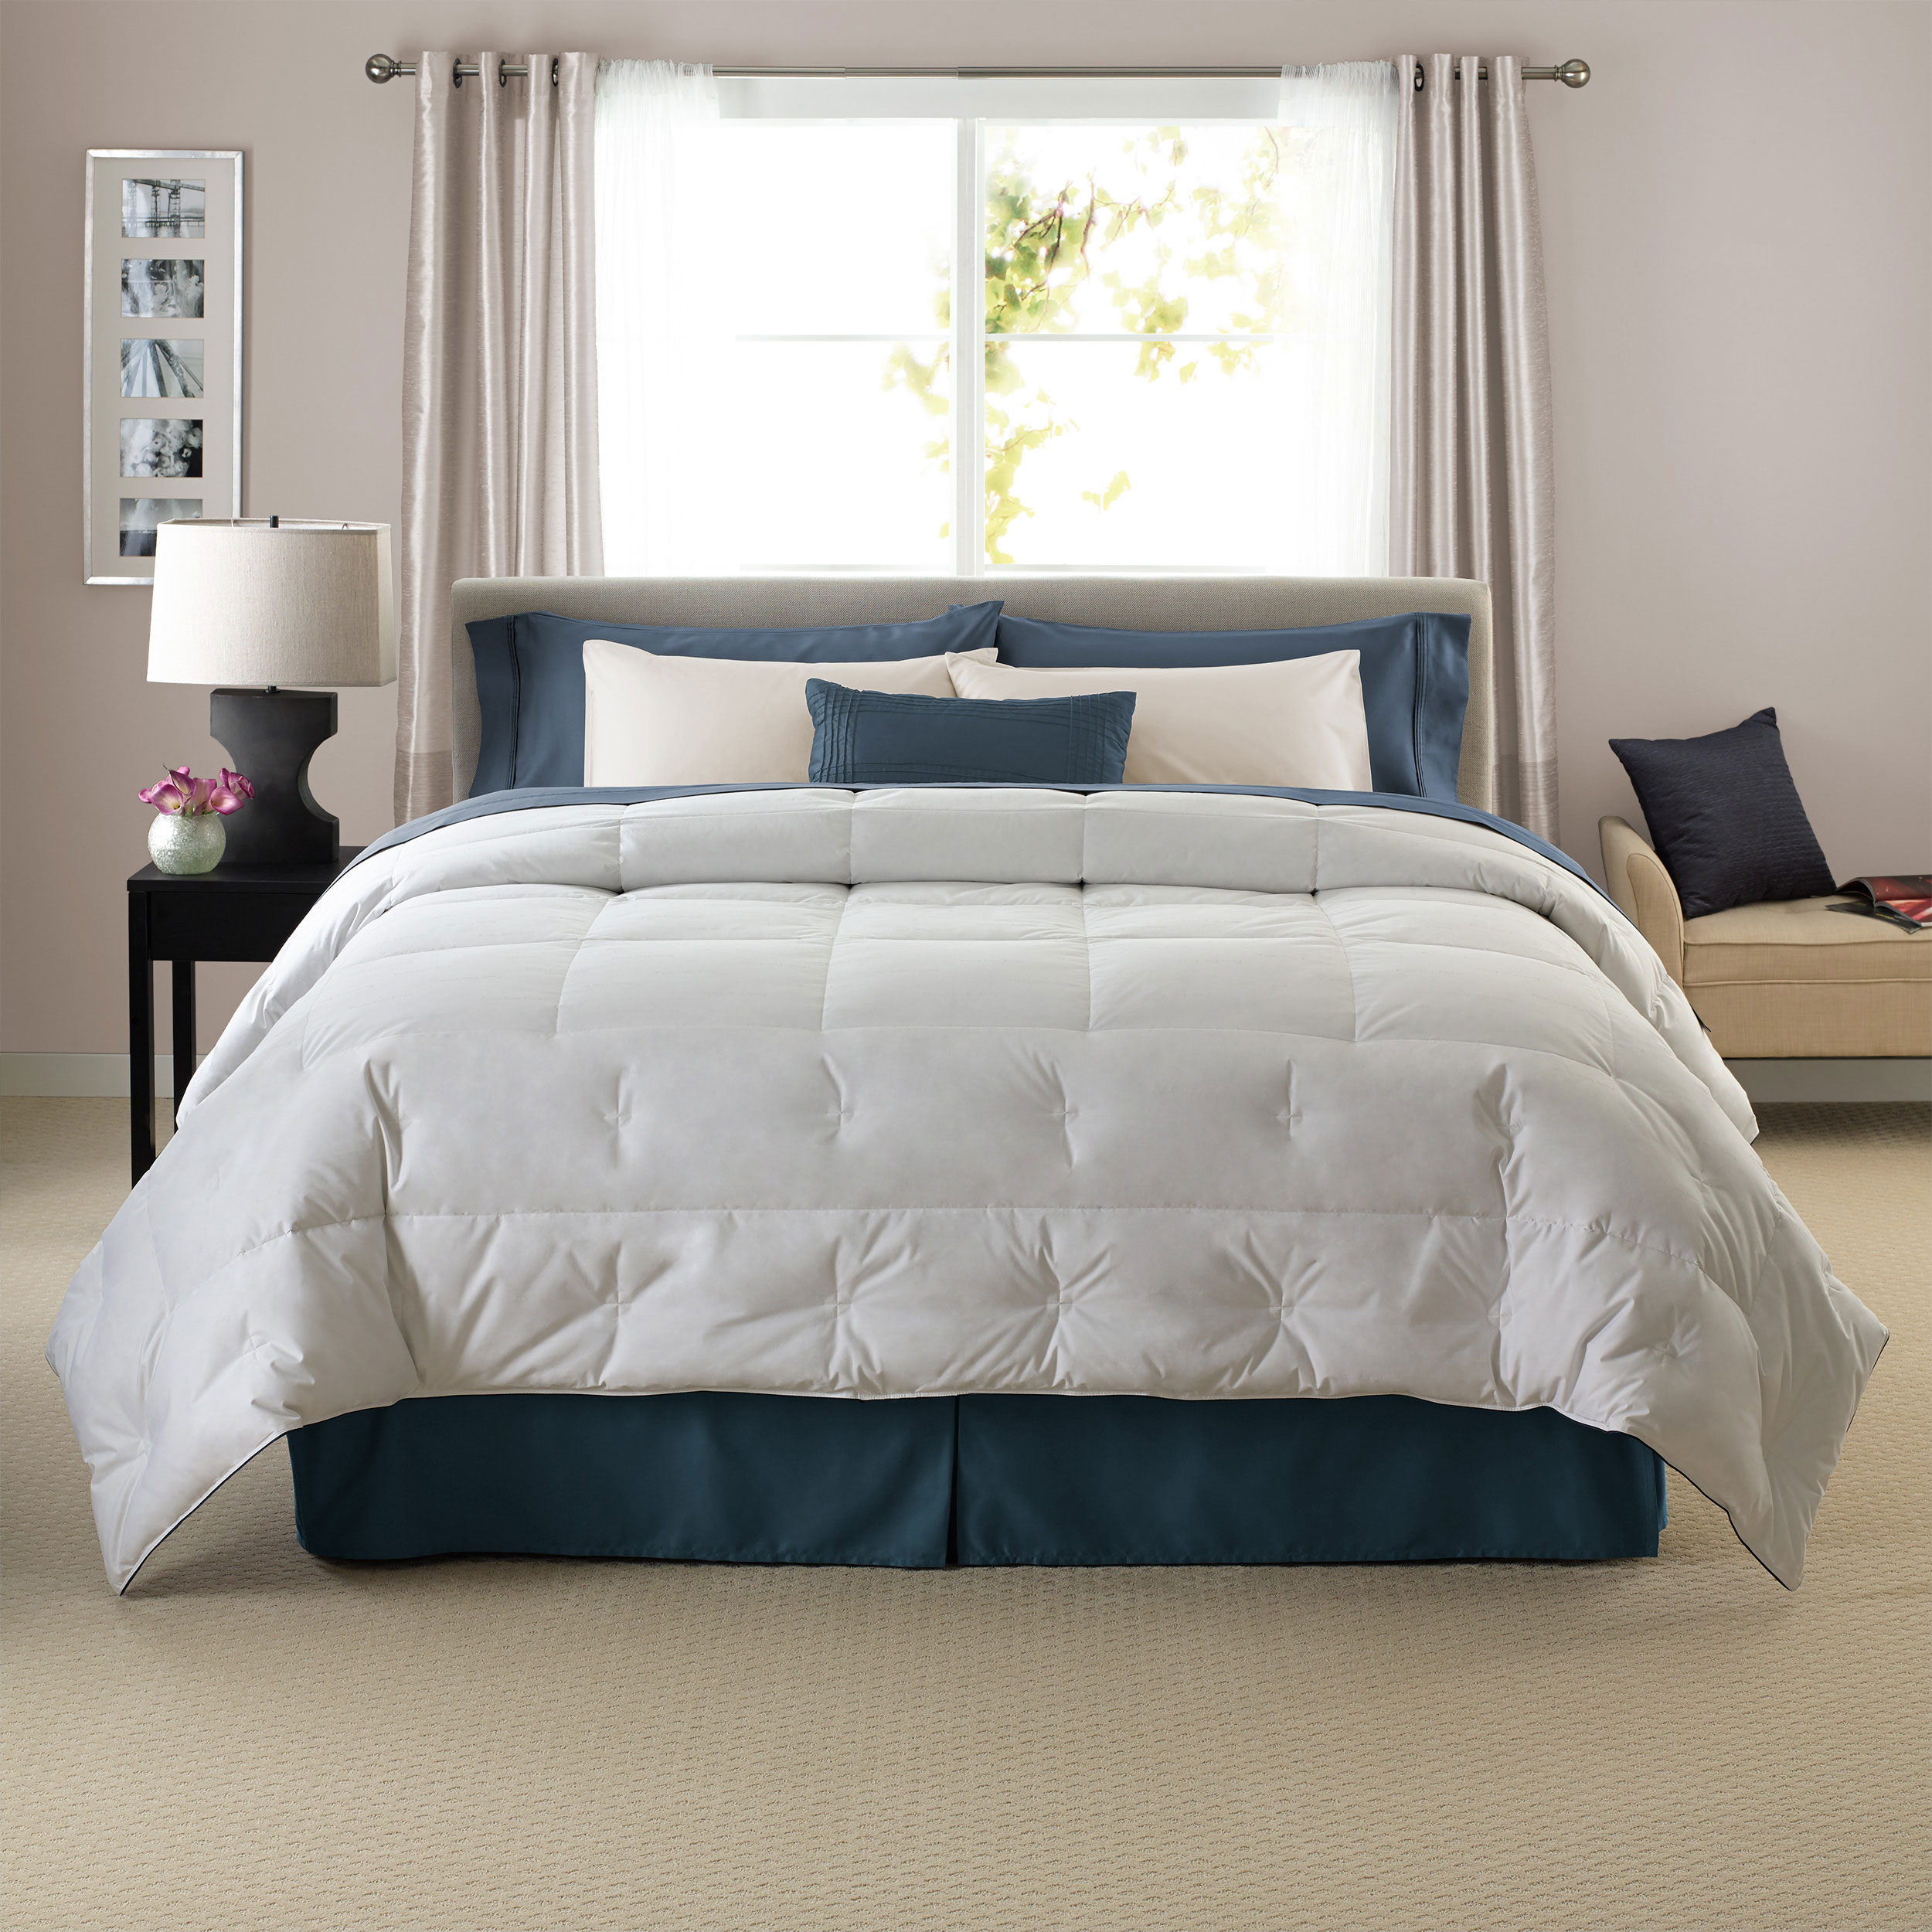 Pacific Coast Grand Down Comforter 230 Thread Count 550 Fill Power Down - King/calking